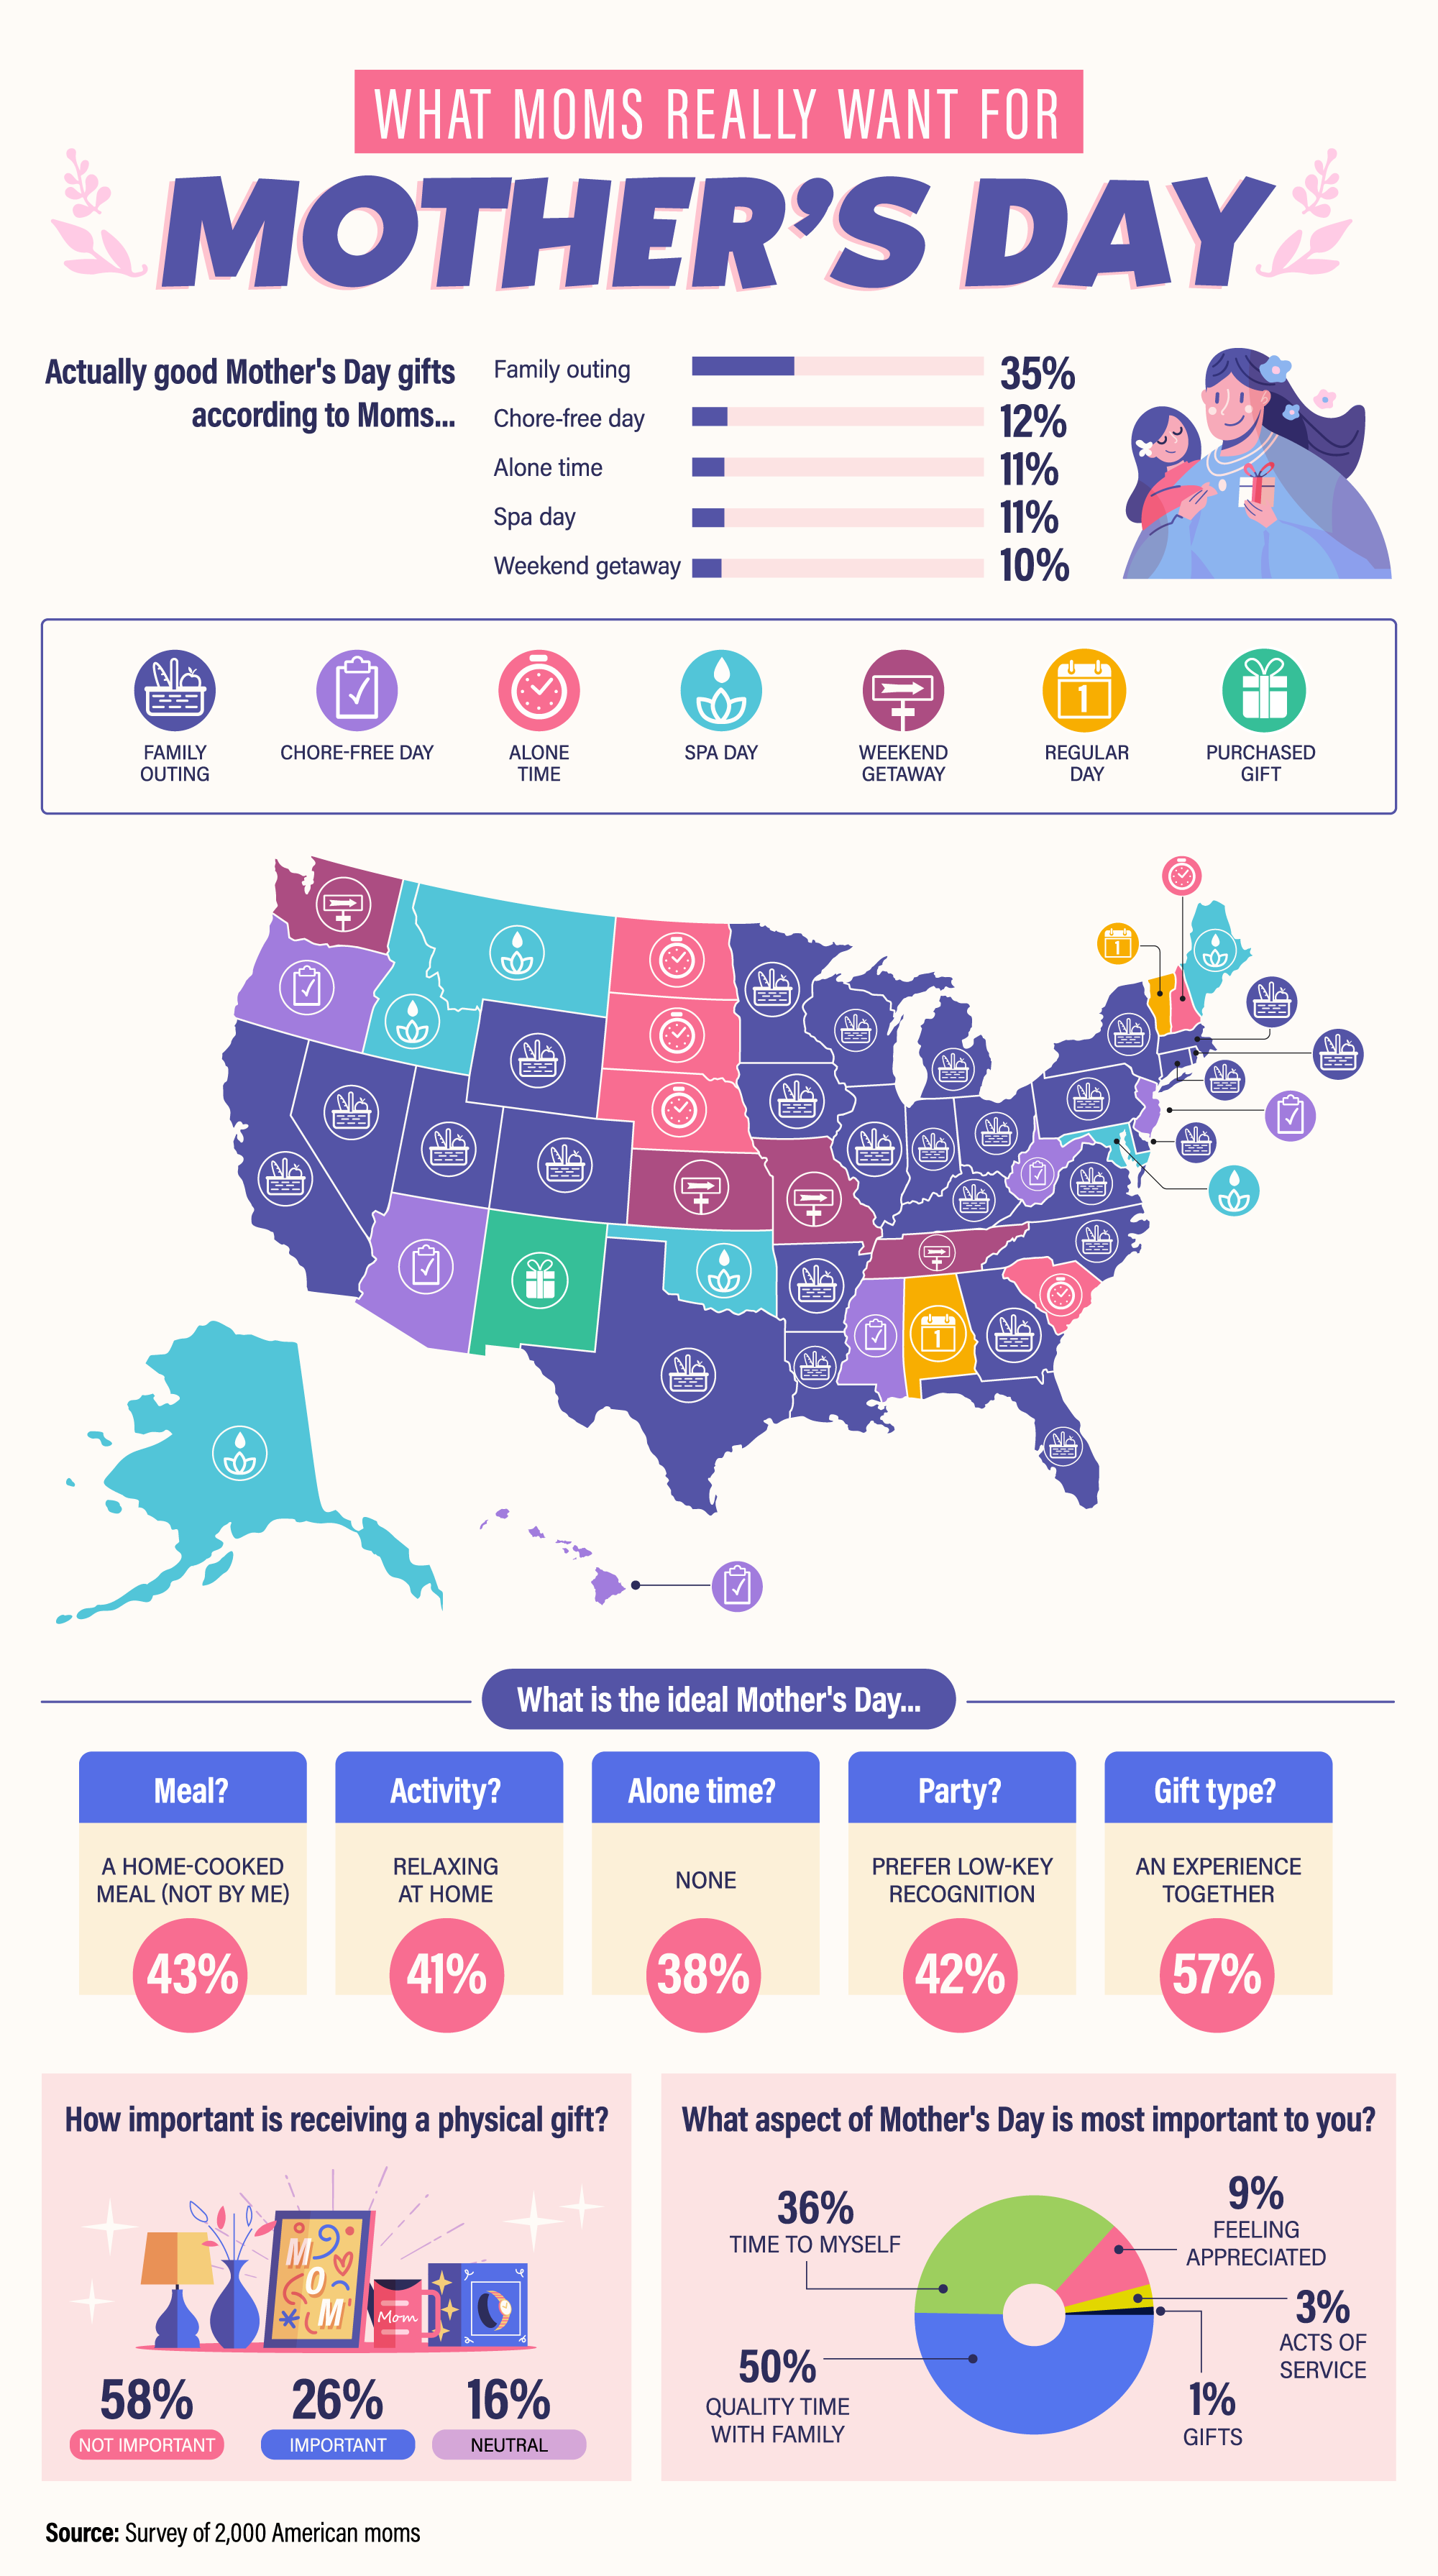 An infographic displaying what moms really want for Mother's Day by state.